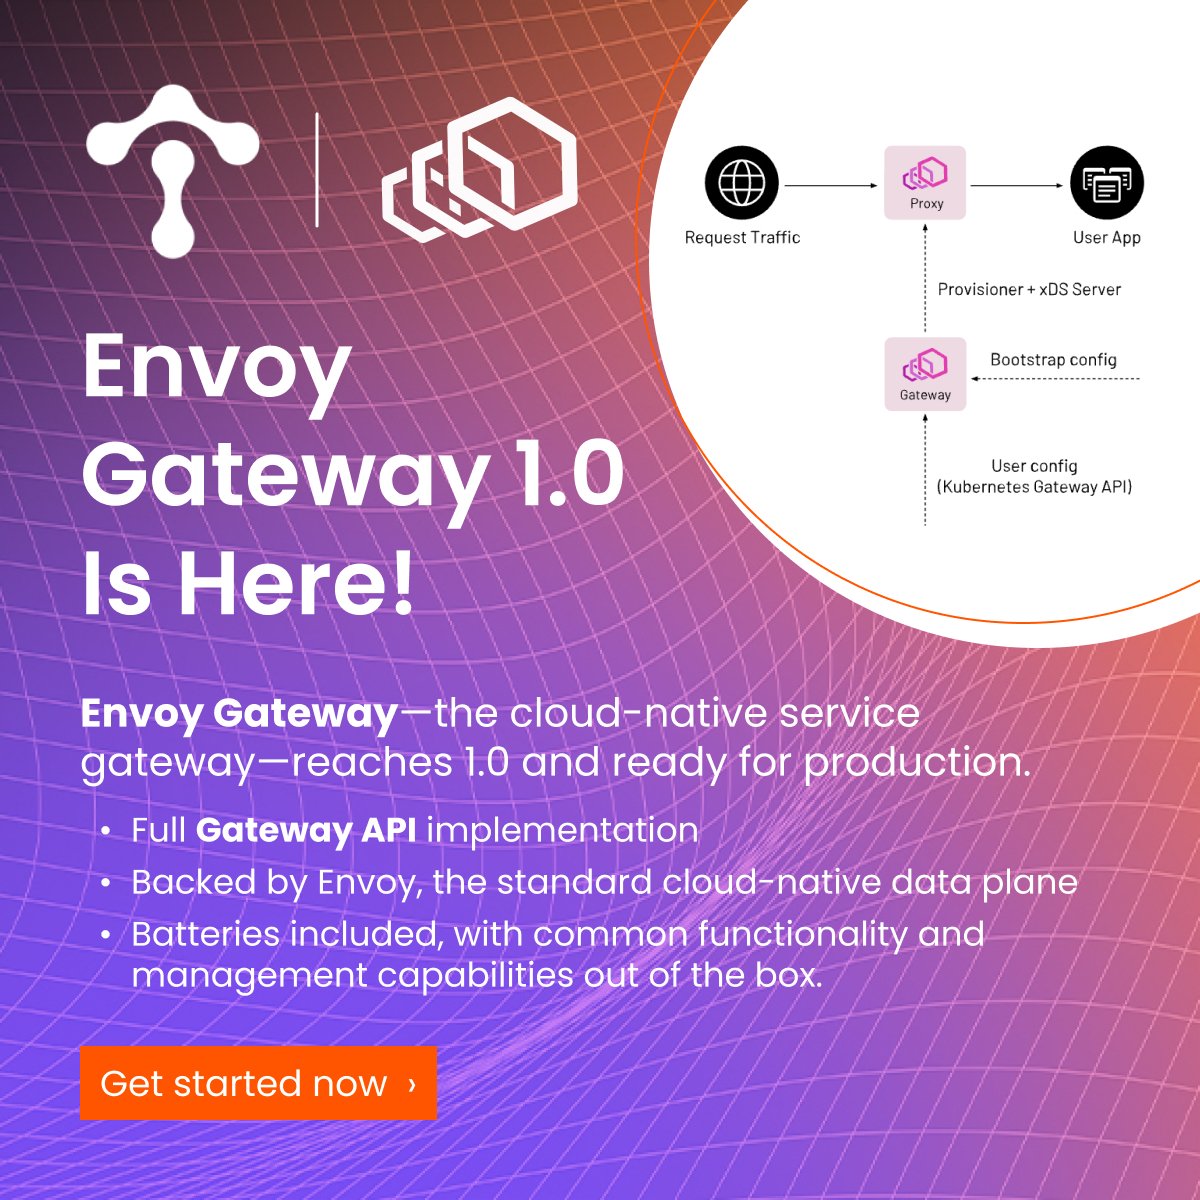 Envoy Gateway 1.0 is here! It's been a wild ride, but the results are stellar. More than 90 contributors and early adopters have taken EG from a bold plan to production ready in 18 mo. Check out the blog and take it for a spin today: tetr8.io/3IGKox1. #envoygateway